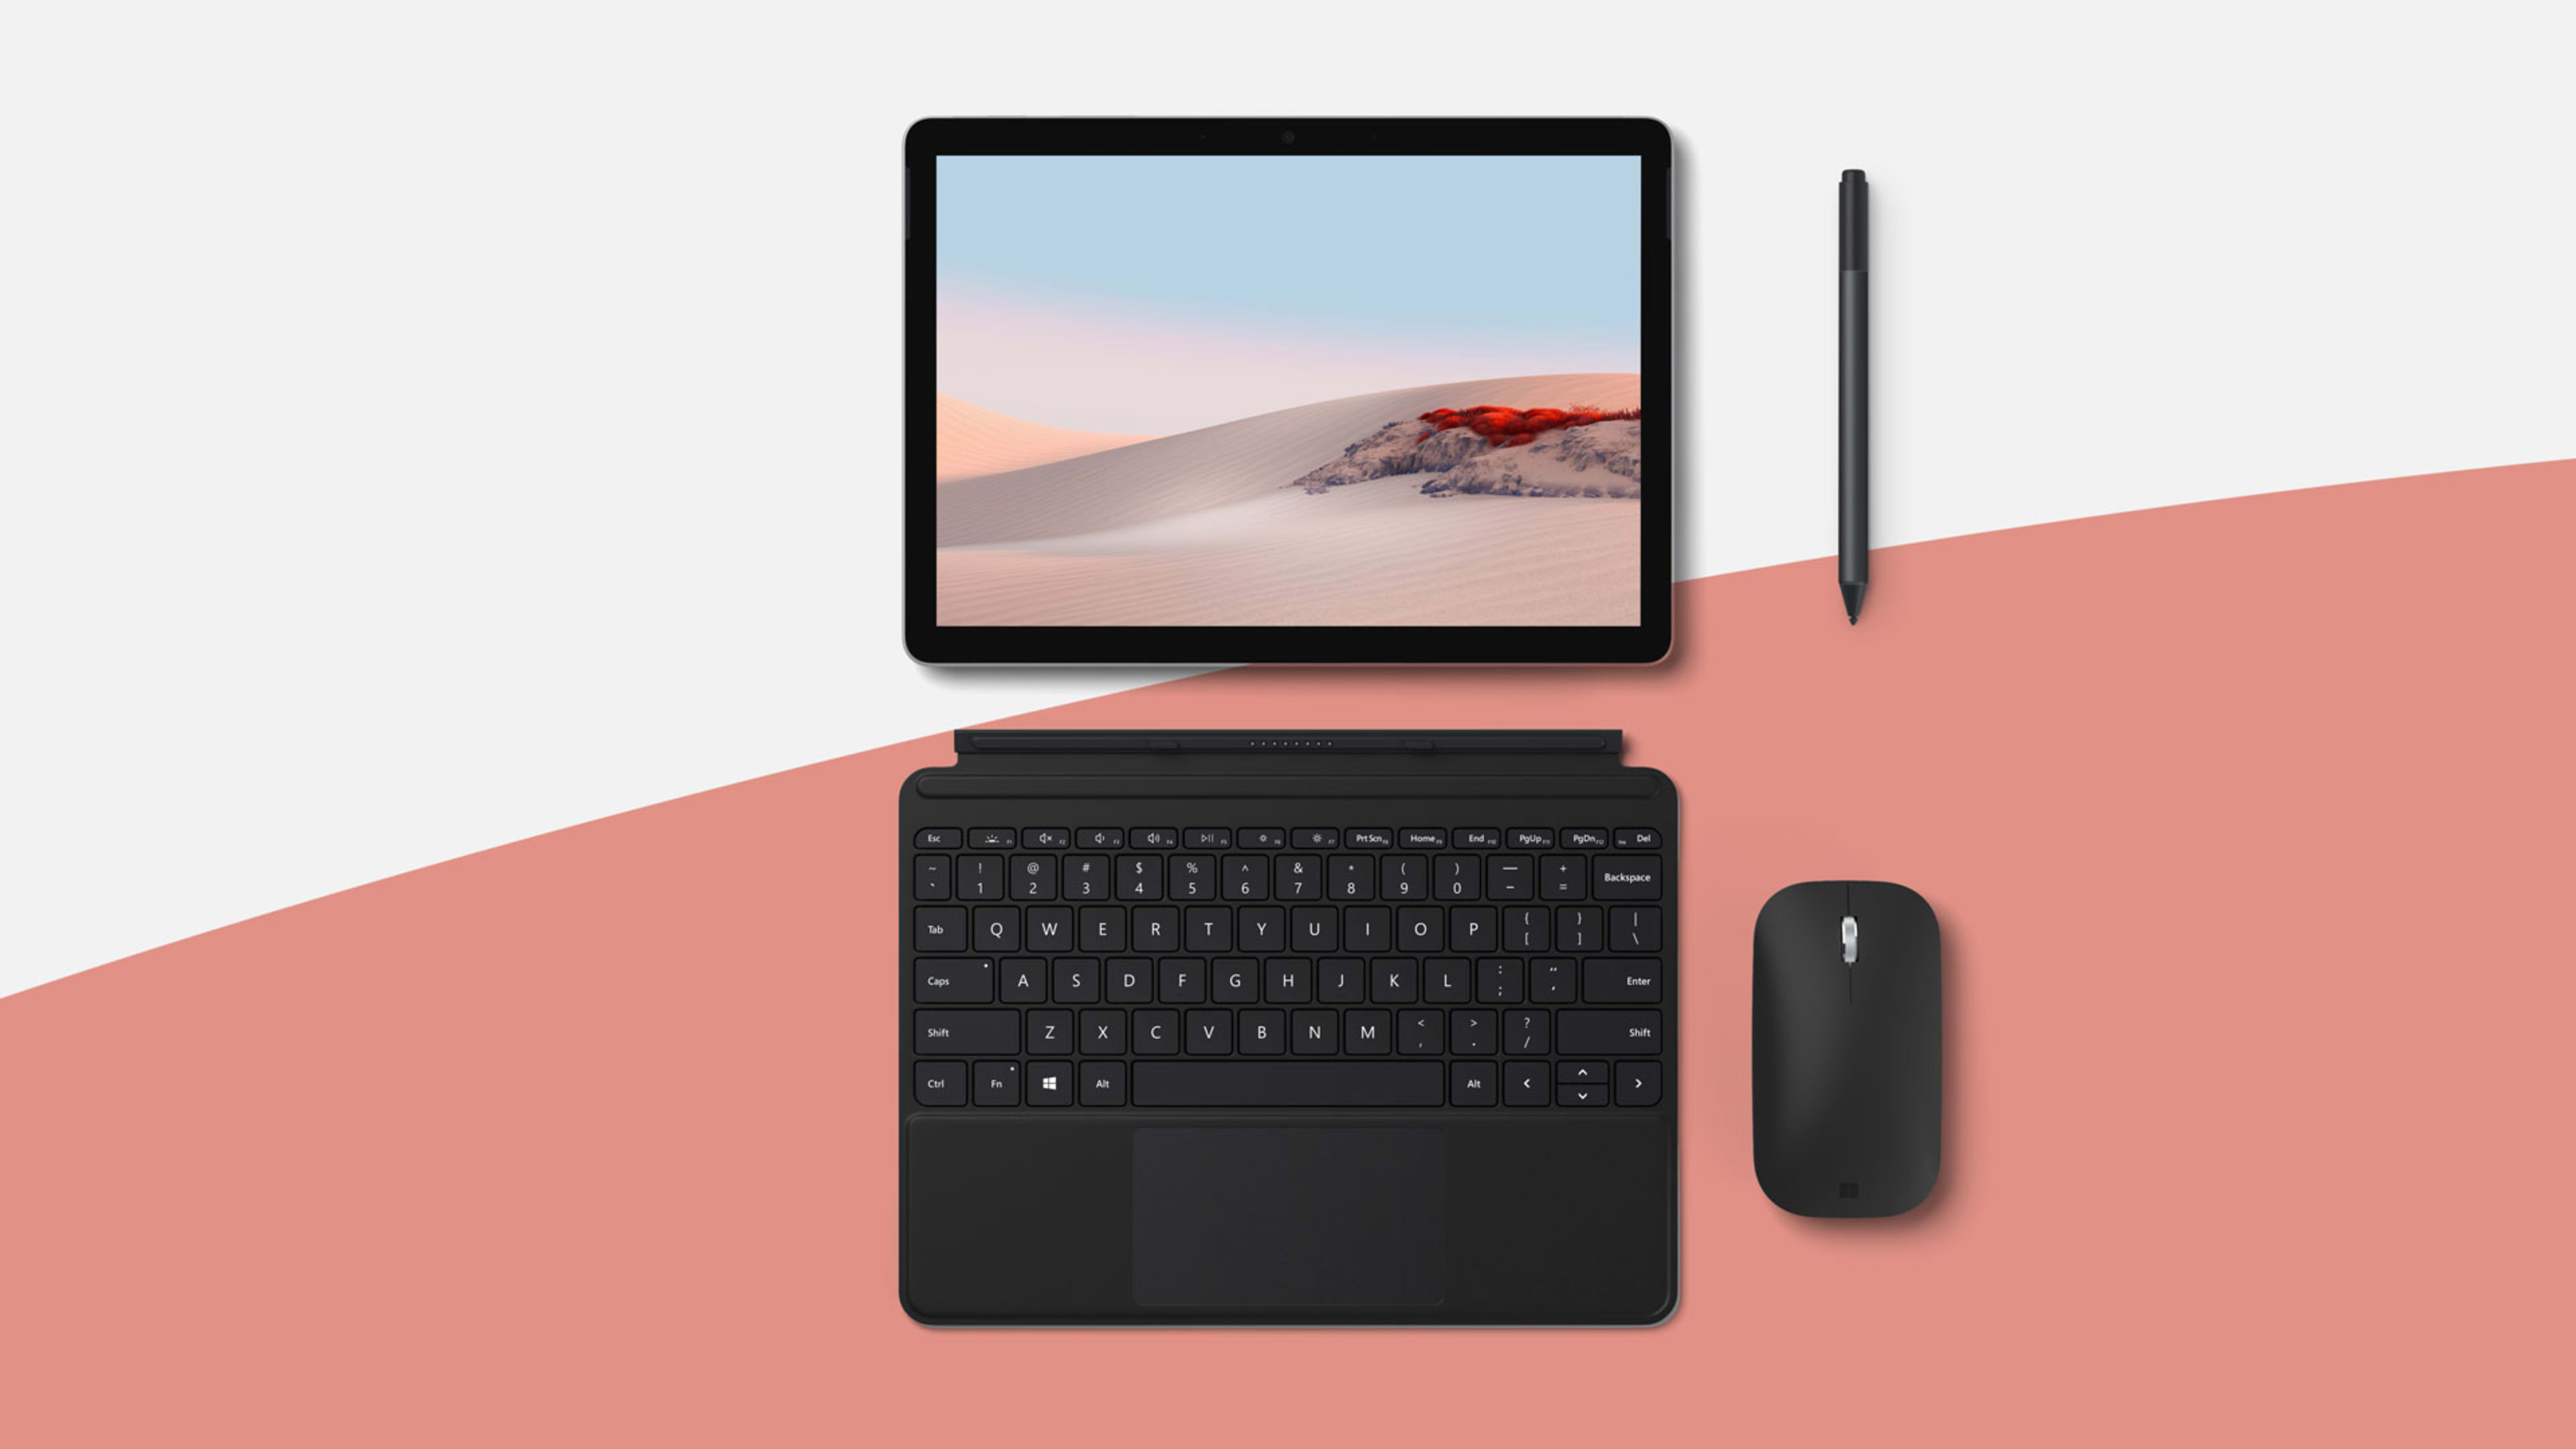 Microsoft’s new Surface gear is arriving at a WFH moment, and that’s okay